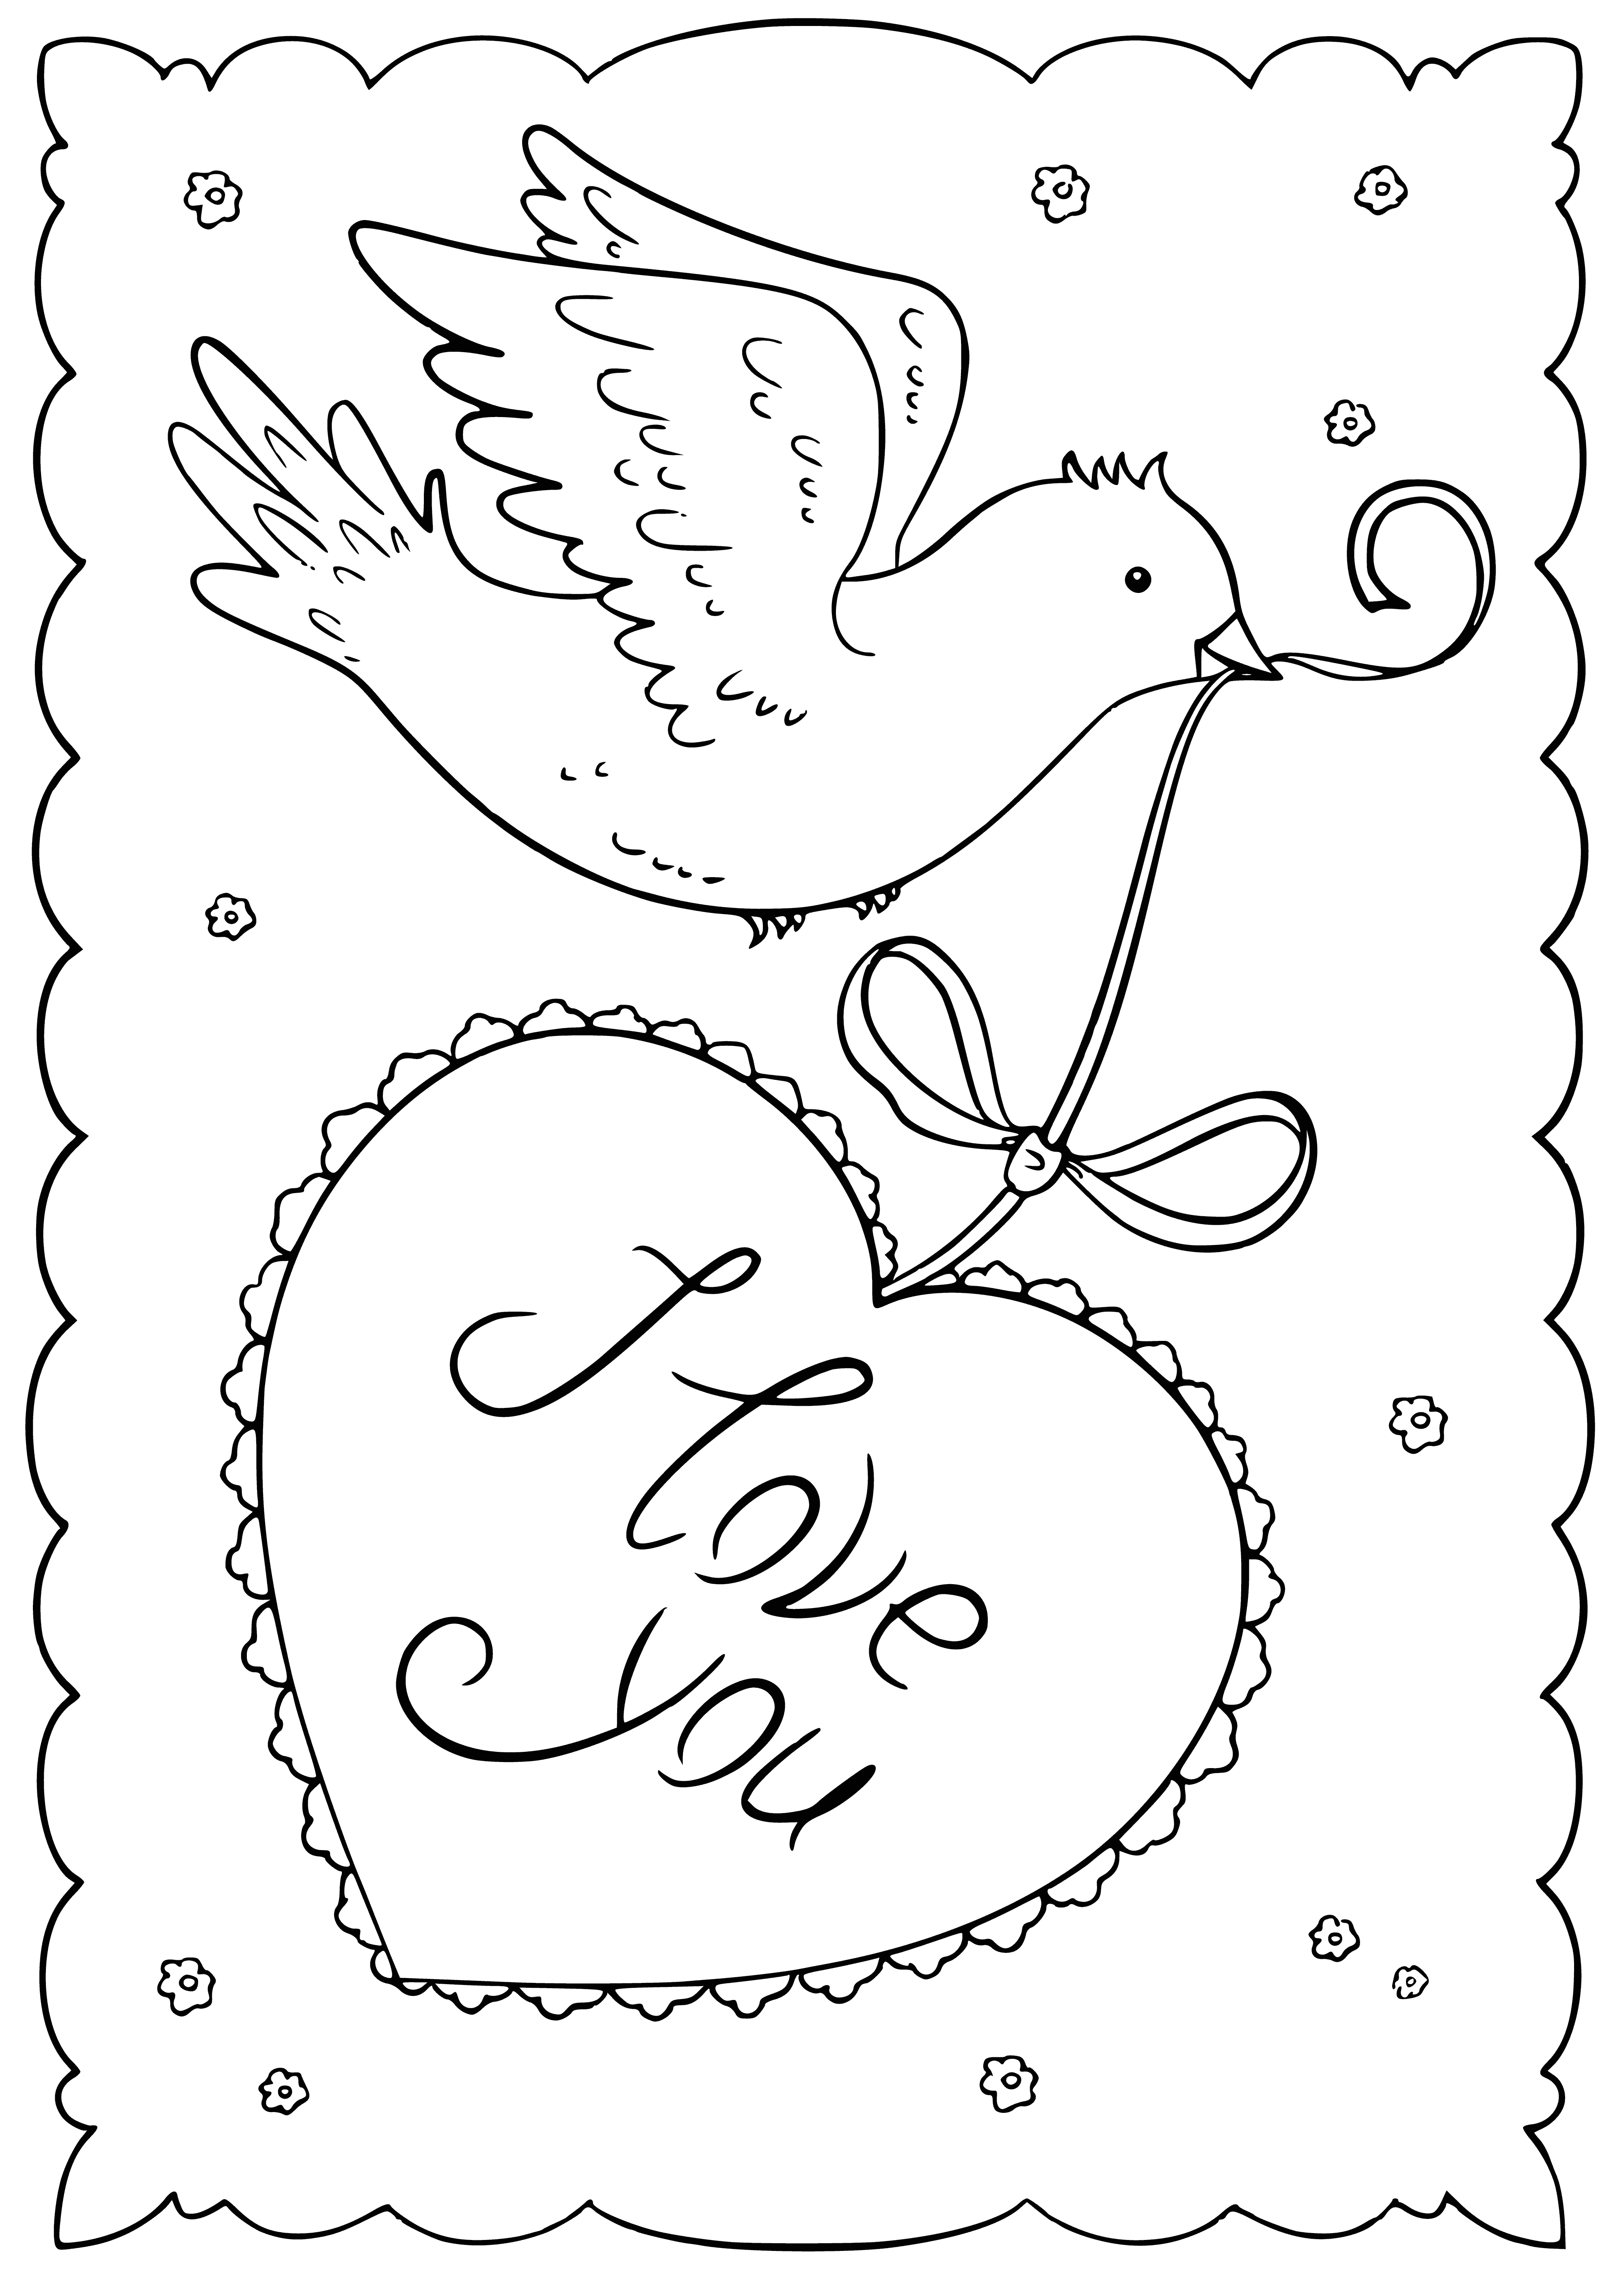 coloring page: Greeting card features a gold heart w/ "Love" in red, red rose on left, & red/white heart on right on a white background.